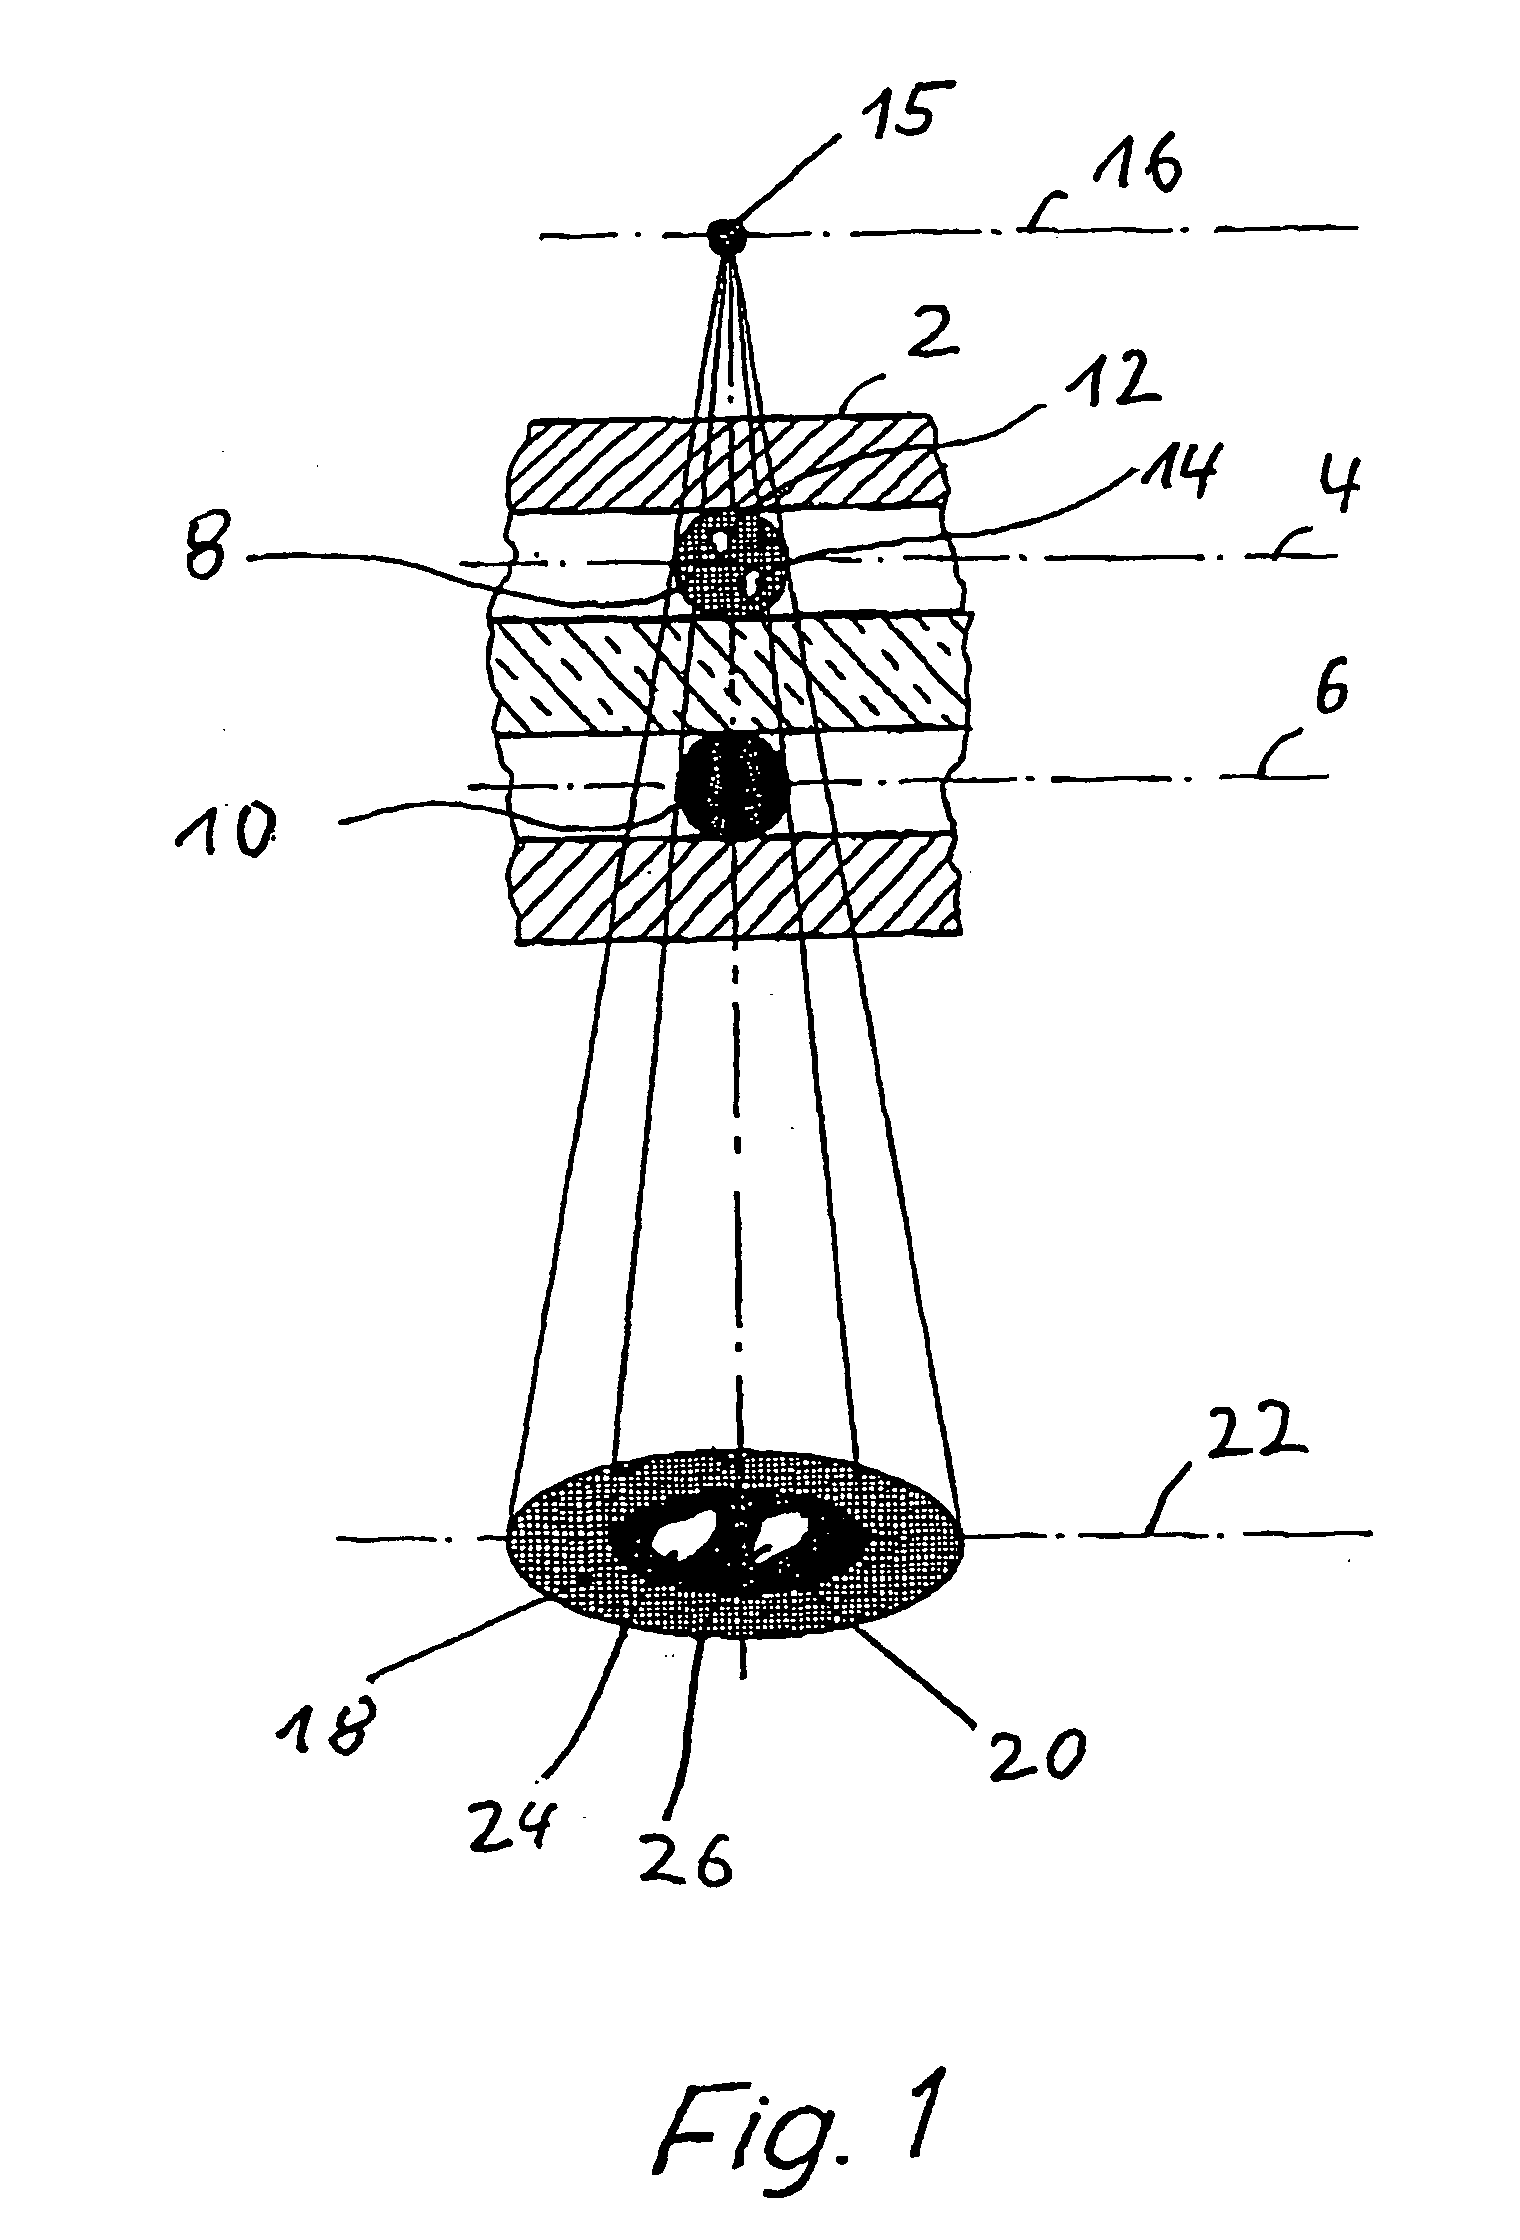 X-ray tomosynthesis device